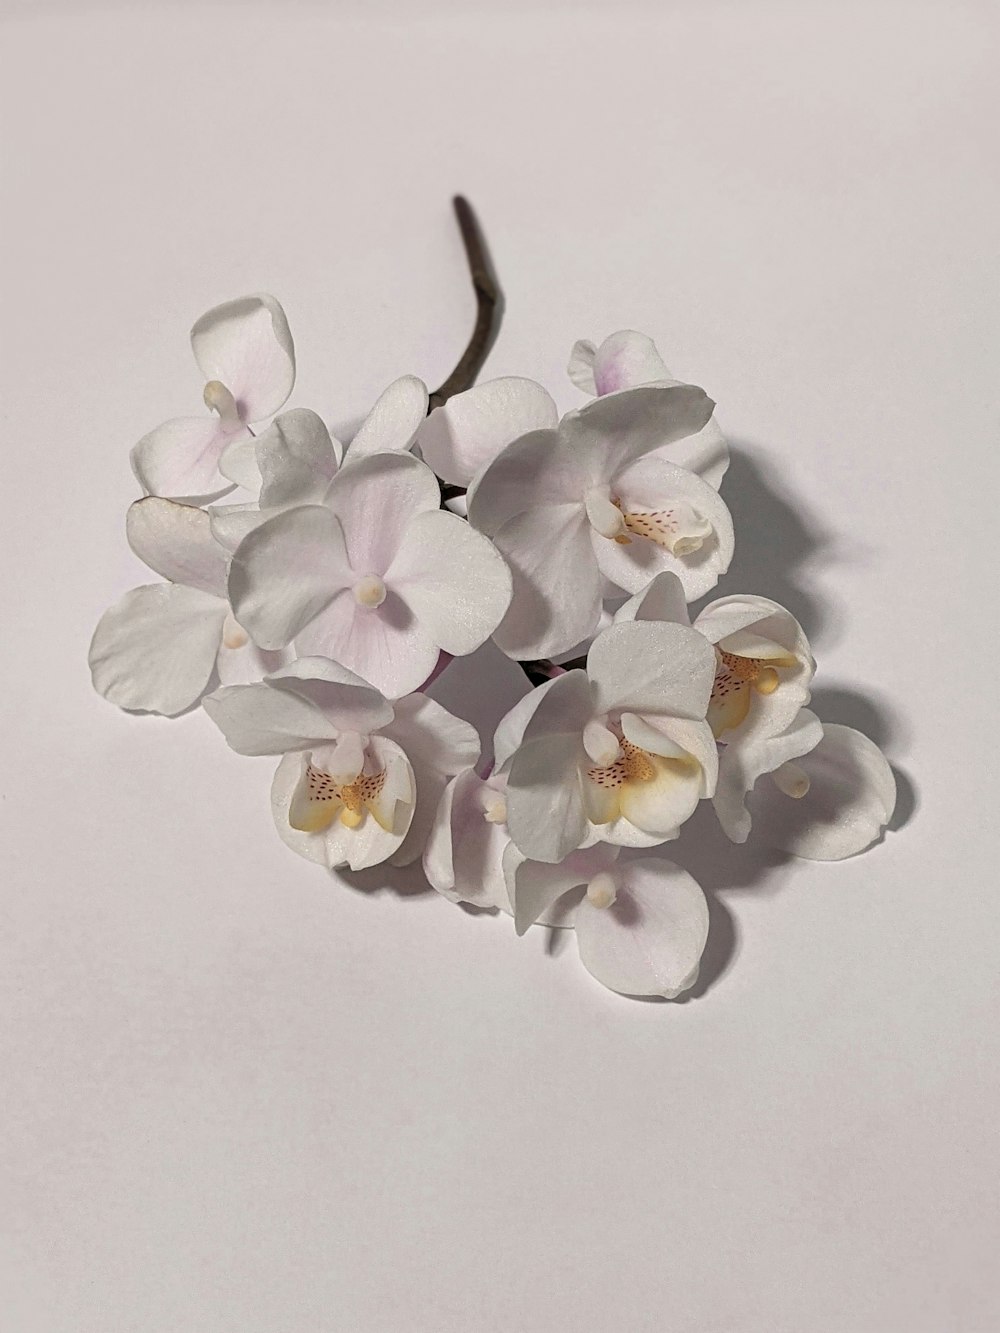 white moth orchids on white surface